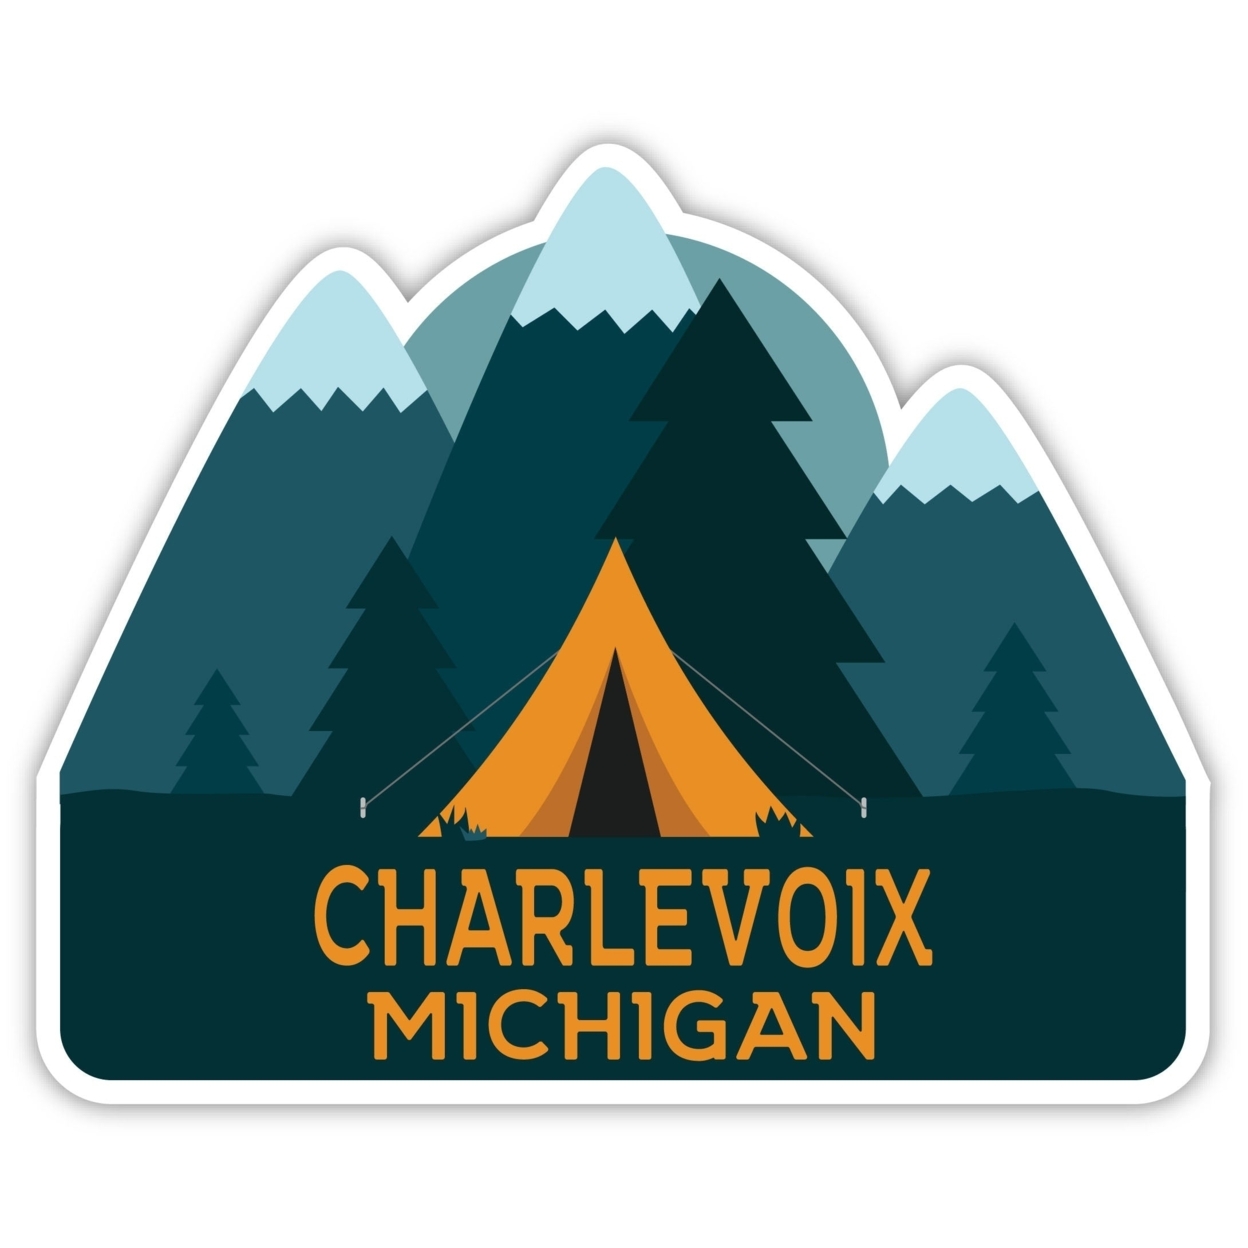 Charlevoix Michigan Souvenir Decorative Stickers (Choose Theme And Size) - 4-Pack, 6-Inch, Adventures Awaits